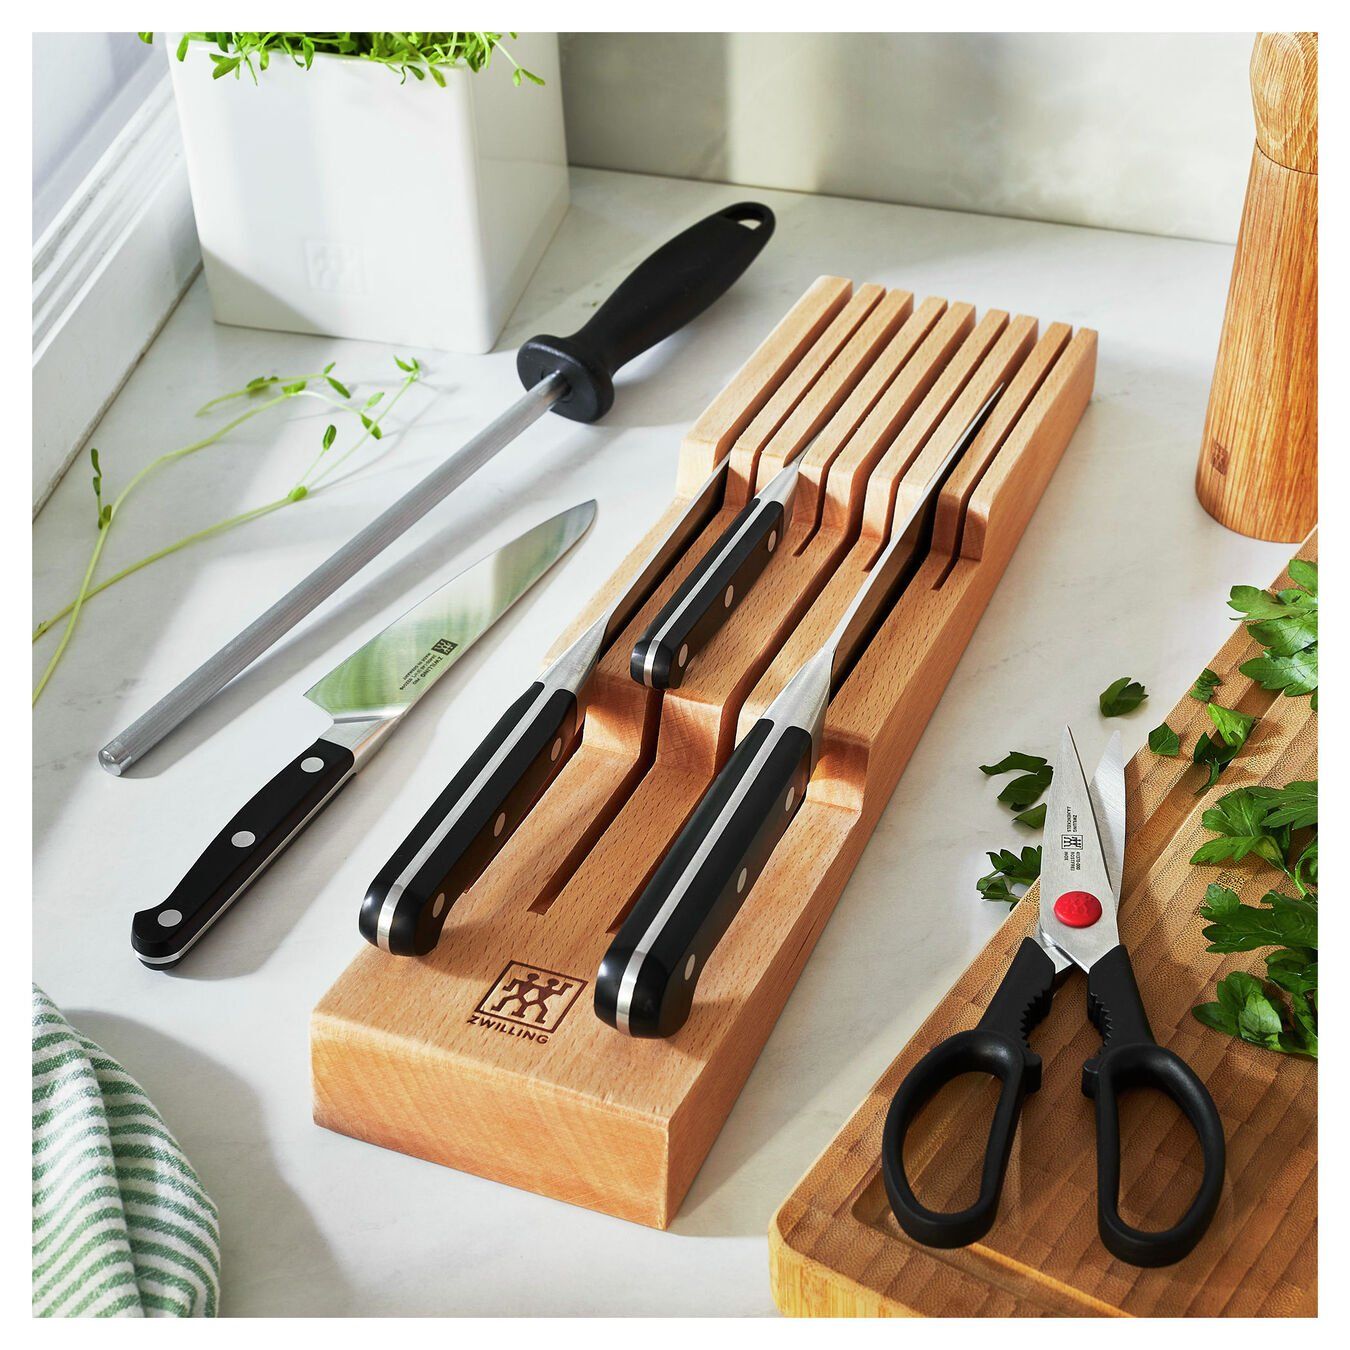 Zwilling J.A. Henckels International CLASSIC 2-pc Asian Knife Set -  Stainless Steel Blades, Dishwasher Safe, Includes 4-in Paring/Utility Knife  and 5-in Santoku Hollow Edge Knife in the Cutlery department at